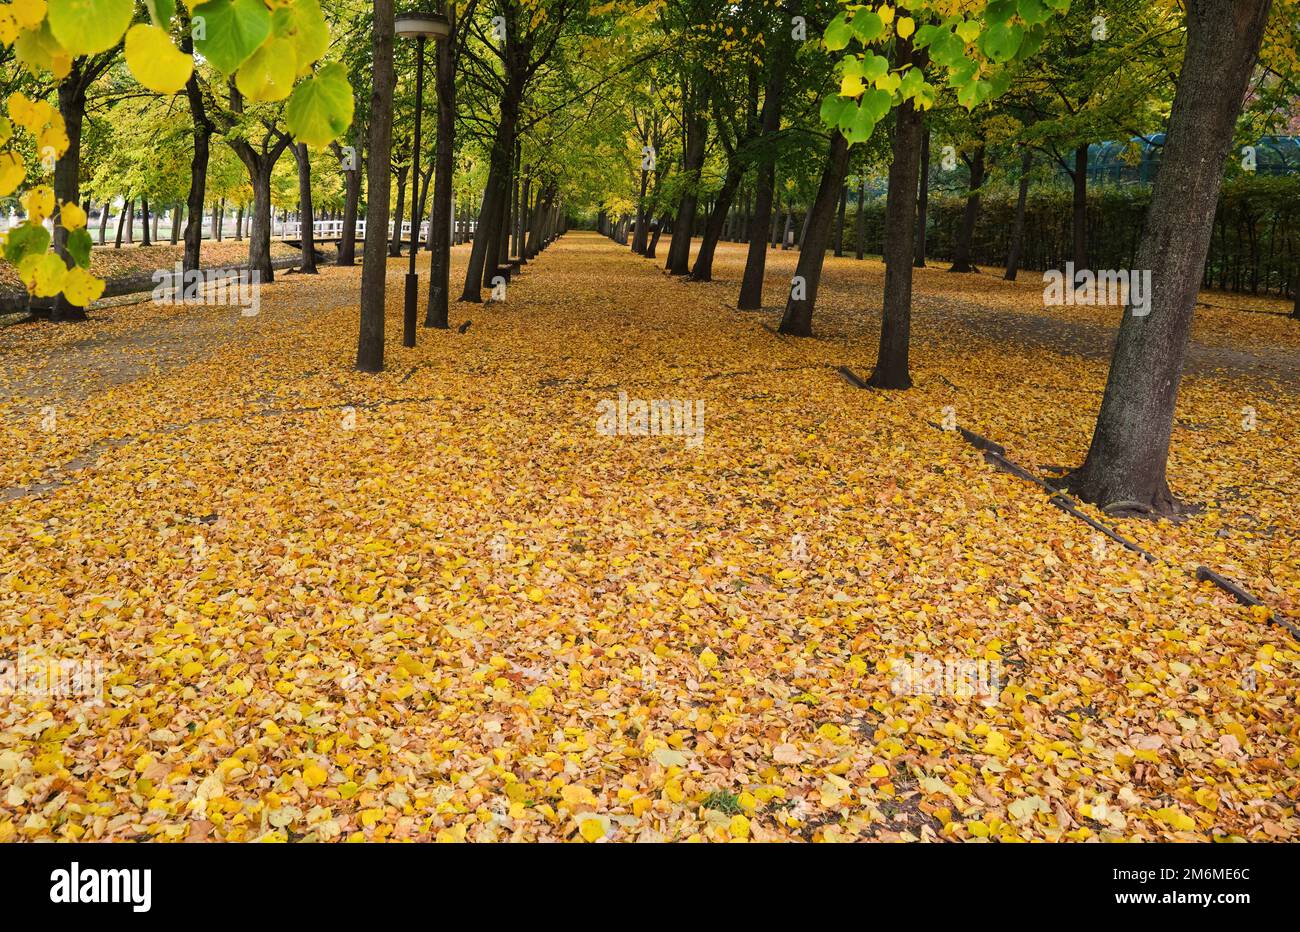 no people Pathway alley covered Foliage trees autumn park many leaves on ground Stock Photo